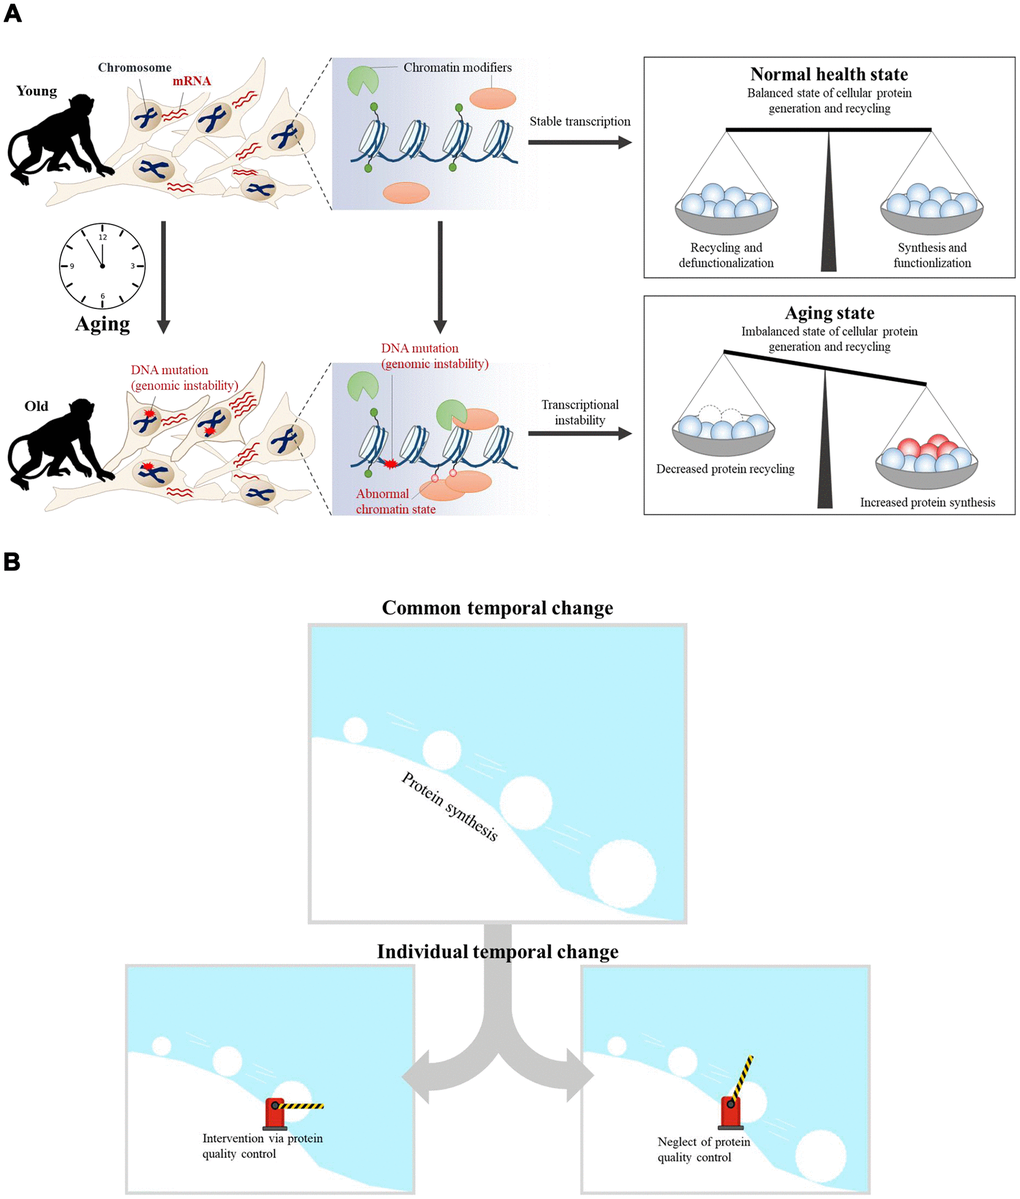 The aging snowball effect model. (A) In the case of young cells, transcriptional programs are tightly controlled by epigenetic regulators. As a result, balanced cellular protein synthesis and recycling are maintained in the ‘normal healthy state.’ However, transcriptional instability increases concomitantly with age. The accumulation of DNA mutations can trigger the recruitment of chromatin modifiers, which results in abnormal chromatin structure and transcriptional instability. Thus, the ‘aged state’ becomes an imbalanced state wherein cellular protein synthesis and recycling are dysregulated. (B) Aging is the result of accumulated dysregulation and damage that results in a “snowball” effect. Accumulated dysregulation and damage is promoted by upregulated protein synthesis during aging. Upregulated protein synthesis has an increasingly greater impact on cellular aging, similar to a snowball rolling down a hill. Individual aging processes could be affected by targeting protein quality control systems, provided that this is the common aging process.